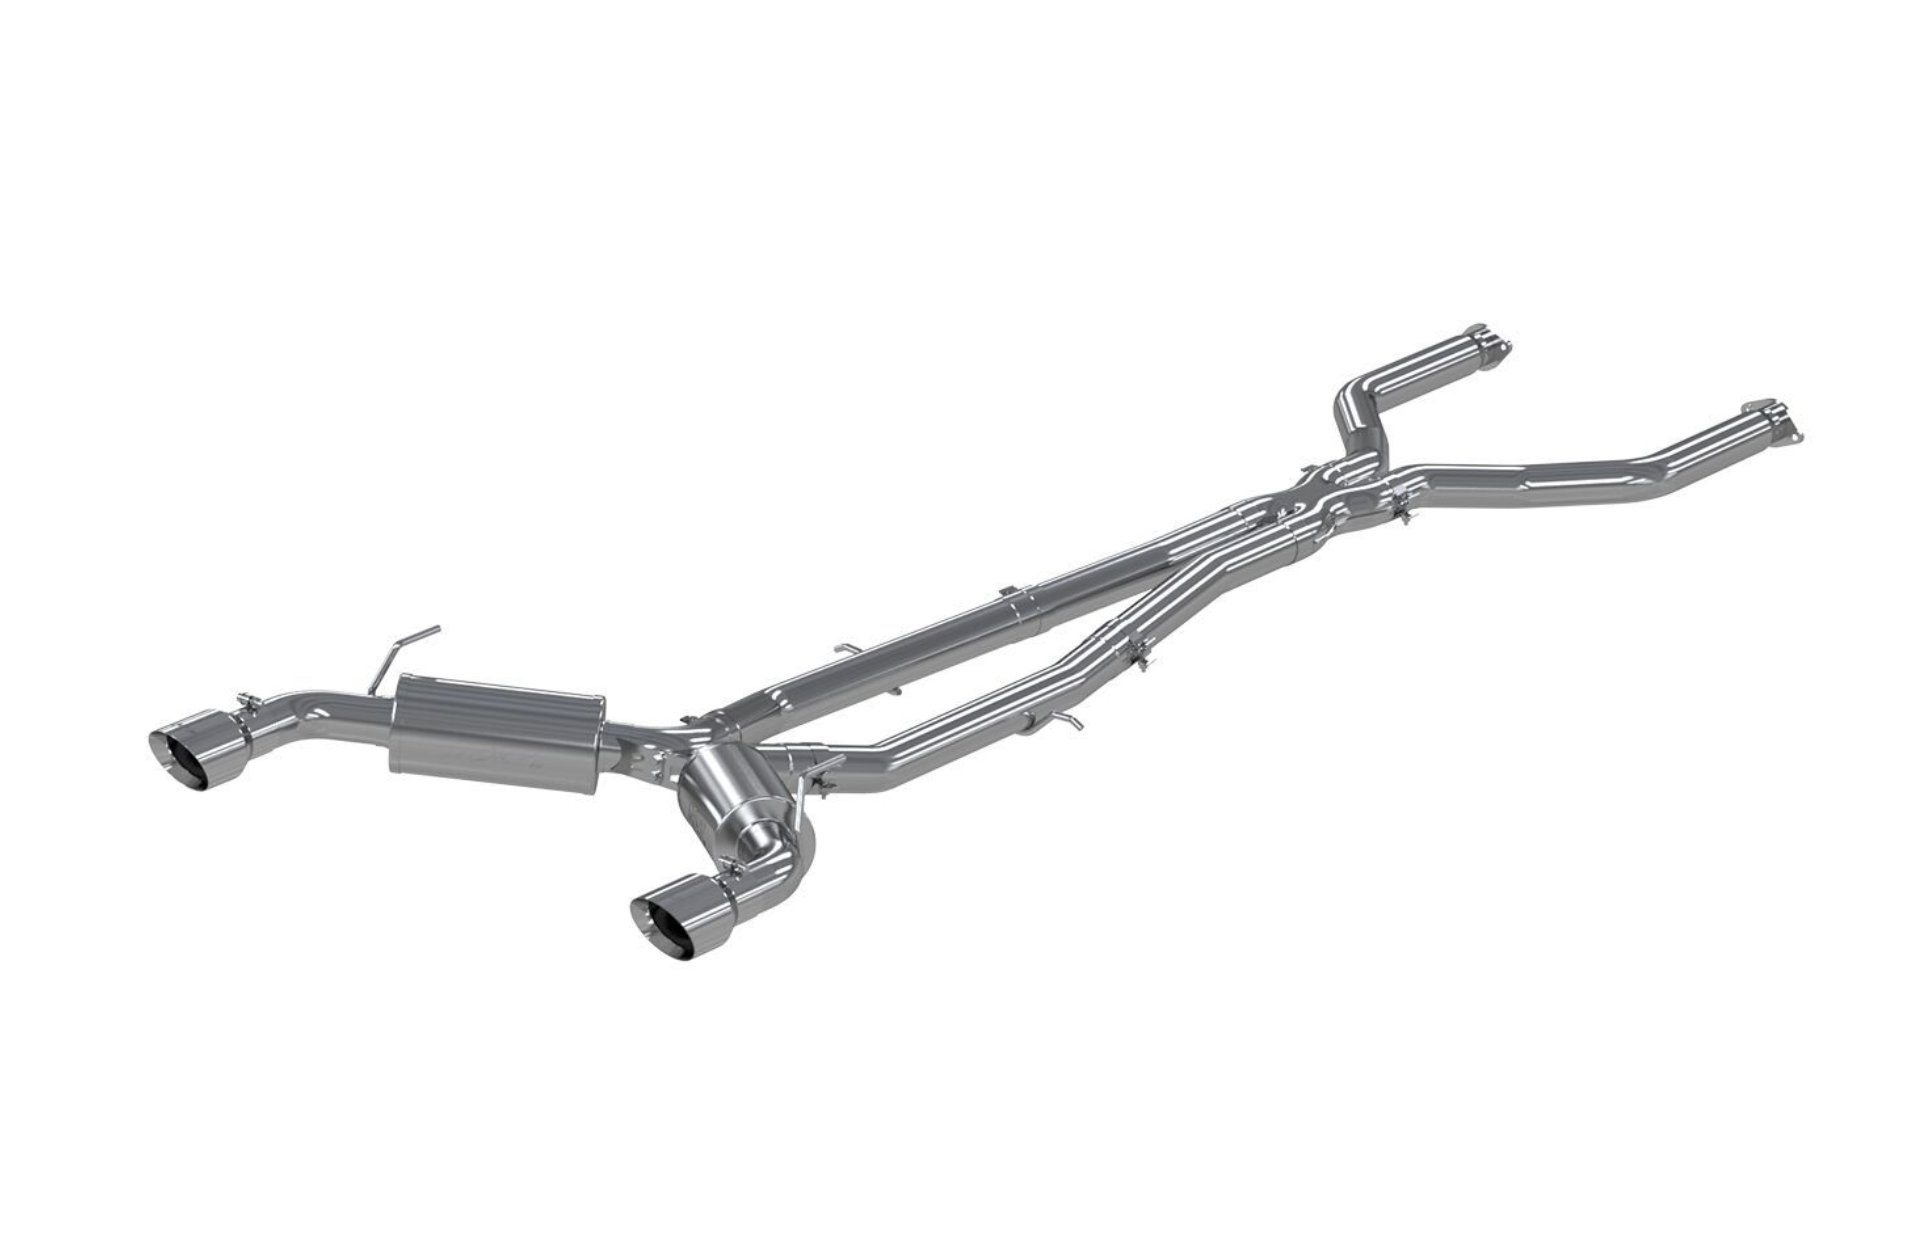 MBRP Pro Series 3" Cat-Back Exhaust System, Dual Rear Exit w/ 4.5" Stainless Steel Tips - Infiniti Q50 3.0L RWD / AWD VR30DDTT